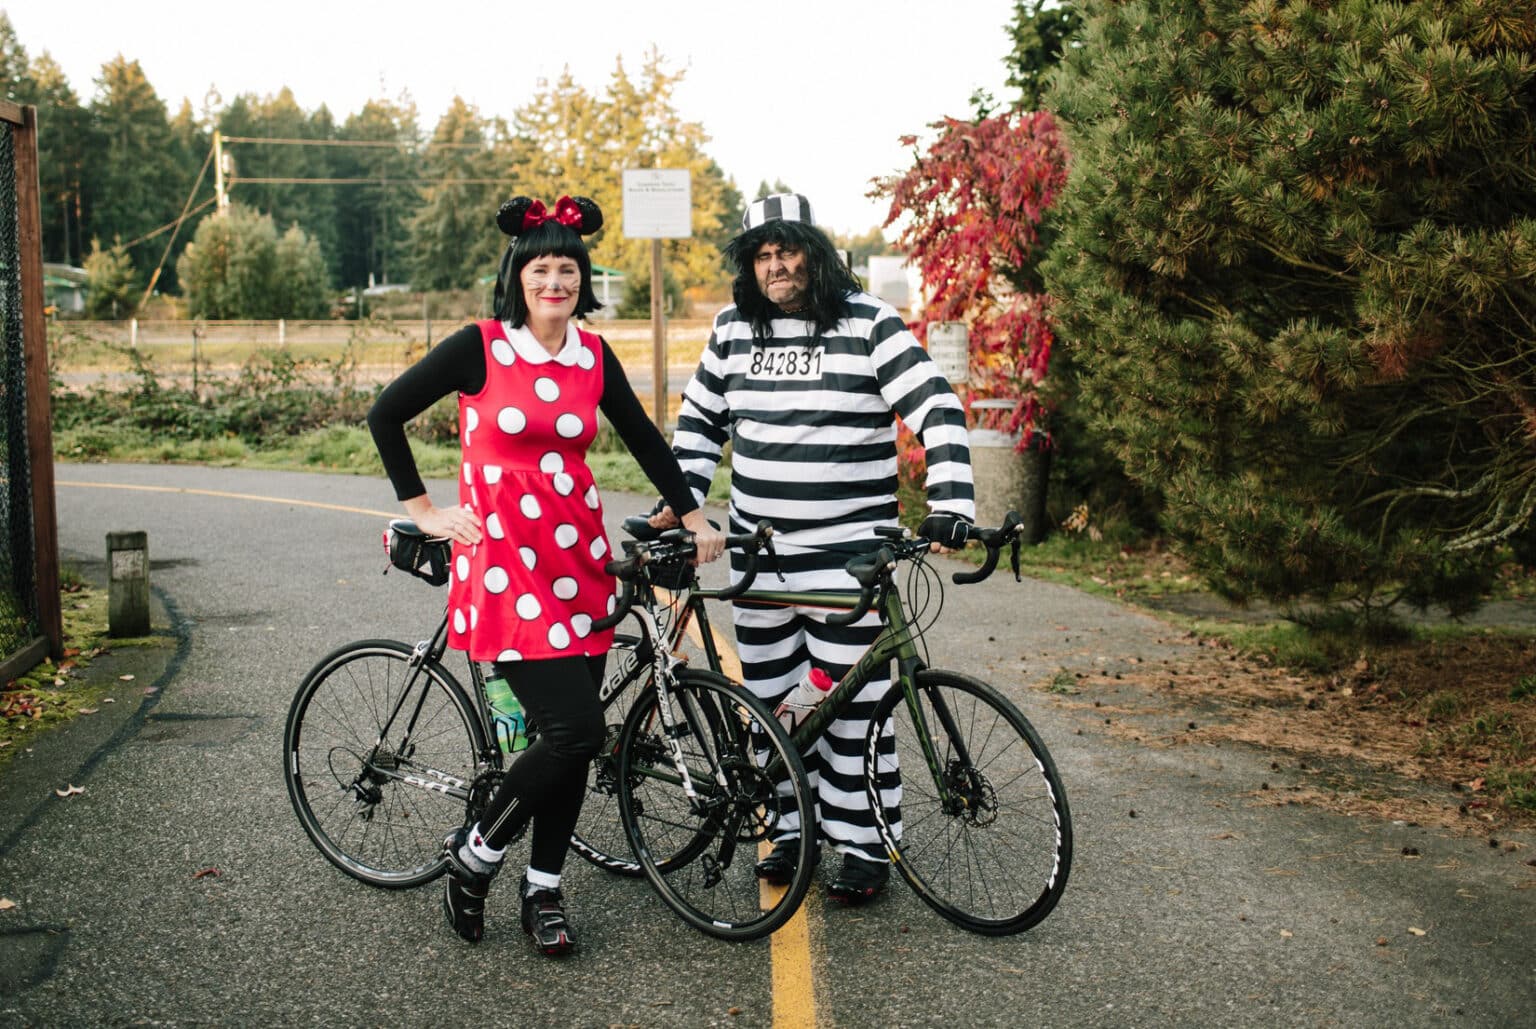 Halloween Happenings Its Getting Spooky In Gig Harbor Gig Harbor Now A Hyperlocal 4096